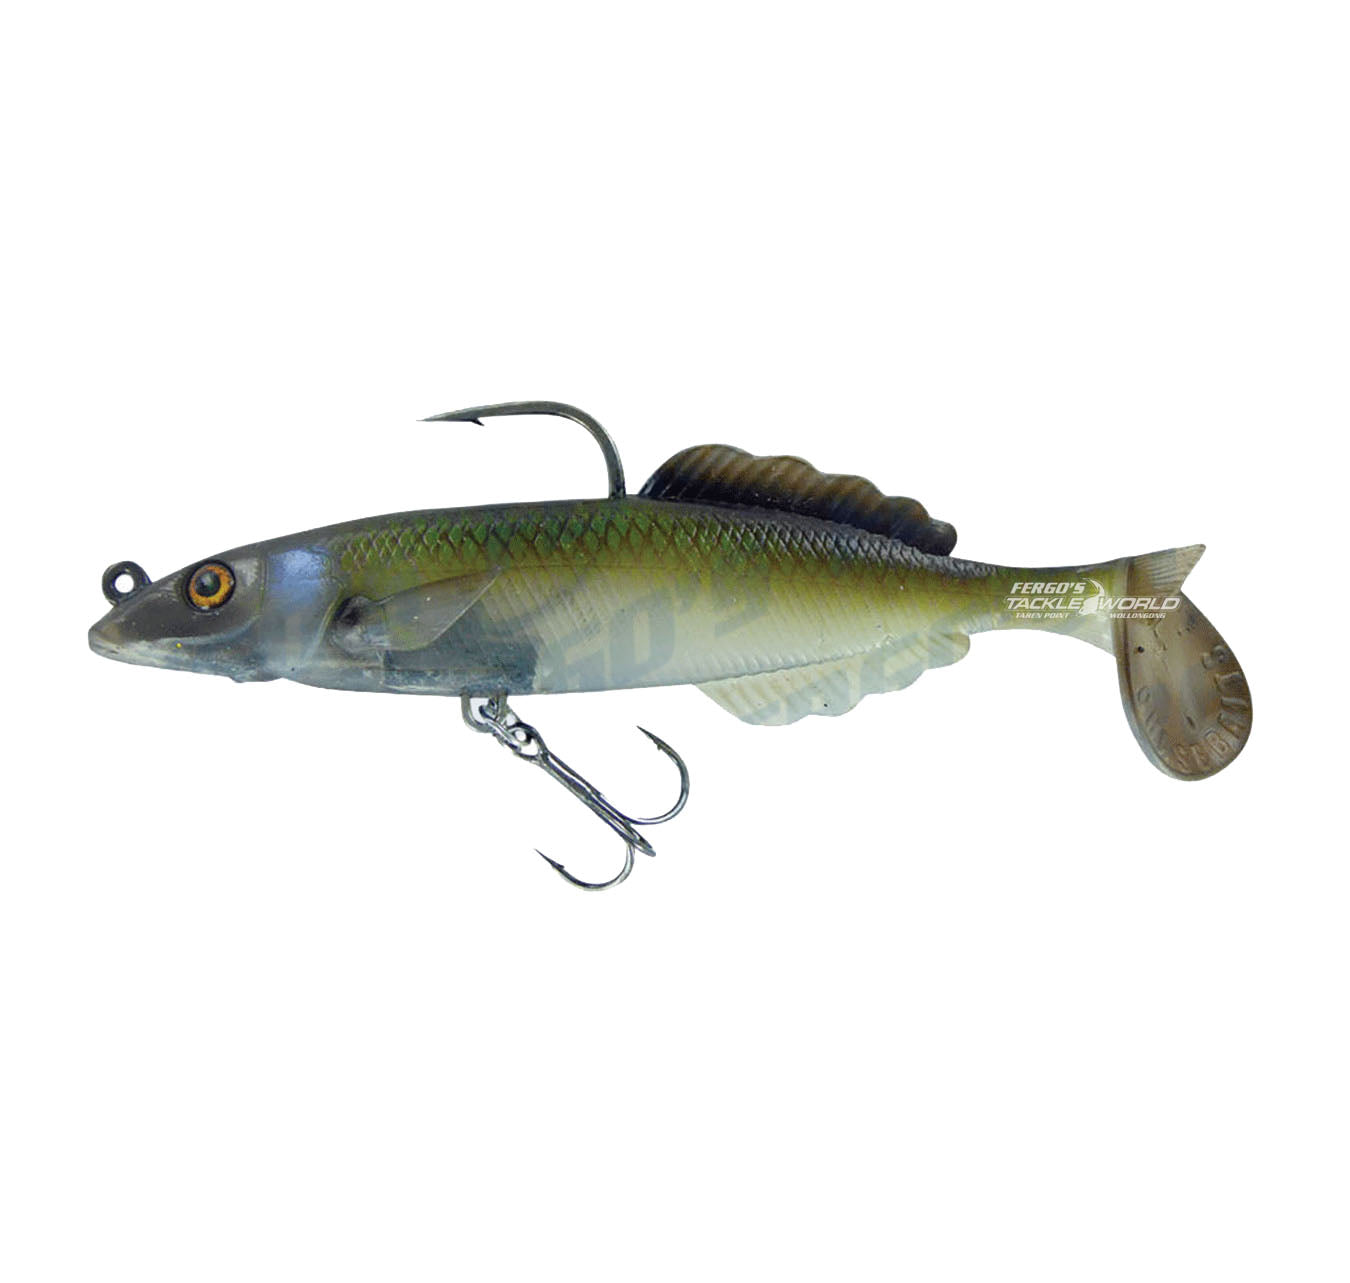 Chasebaits Live Whiting 95mm Sand Whiting